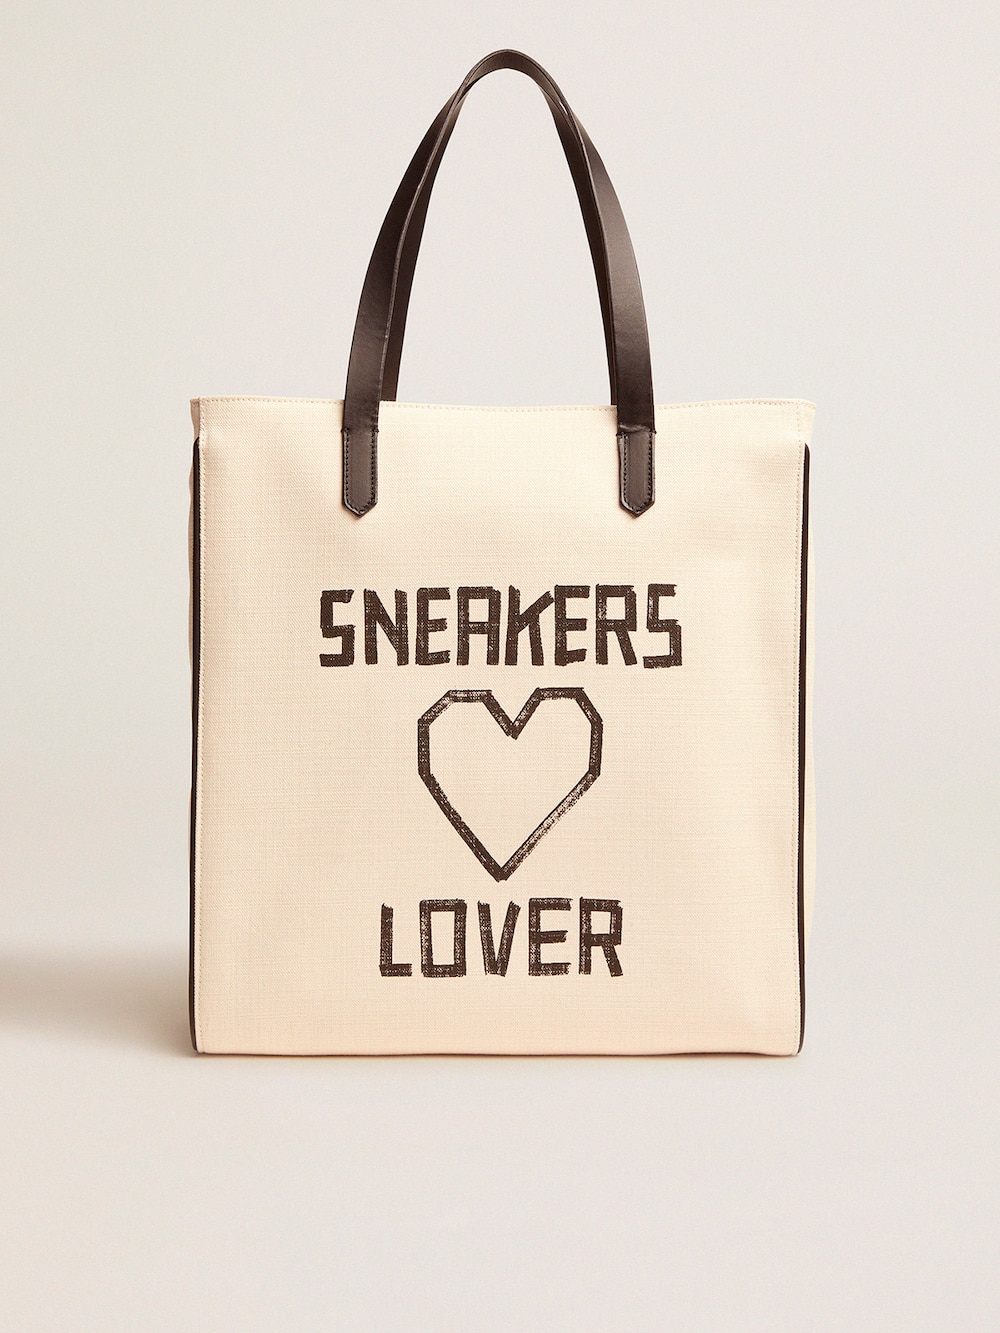 Golden Goose - "Sneakers Lovers" North-South California Bag in 